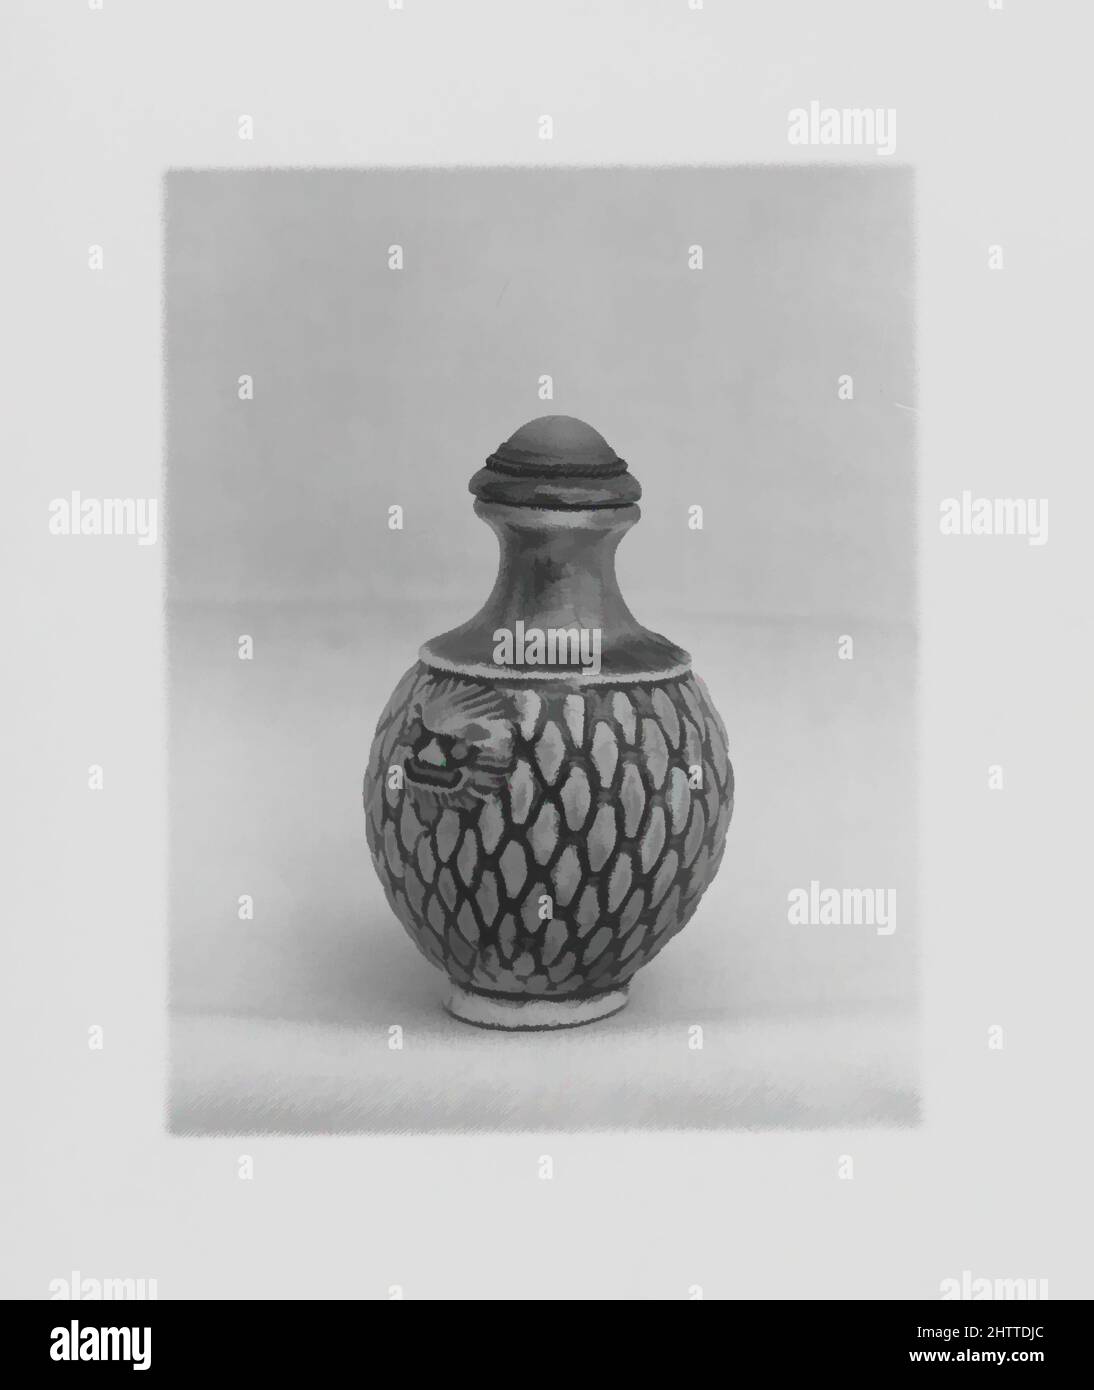 Snuff Bottle, Qing dynasty (1644–1911), Jiaqing period (1796–1820), 19th century, China, Porcelain, H. 2 9/16 in. (6.5 cm), Snuff Bottles Stock Photo